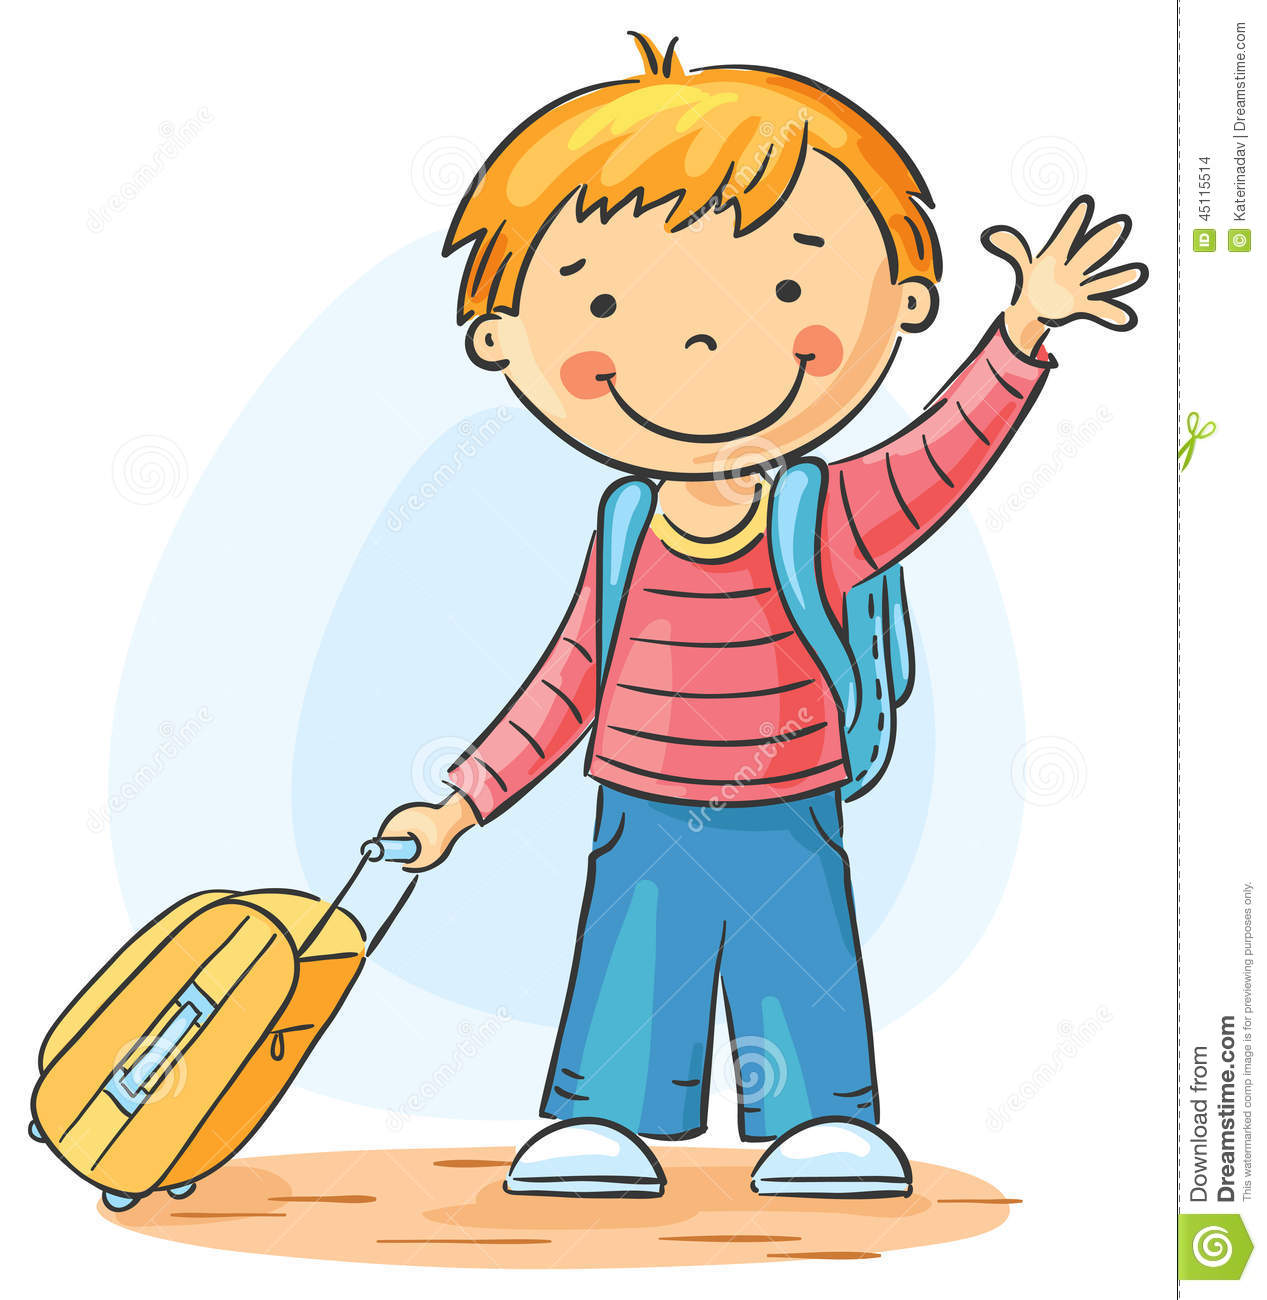 Child With A Suitcase And Backpack Is Leaving And Waving Goodbye